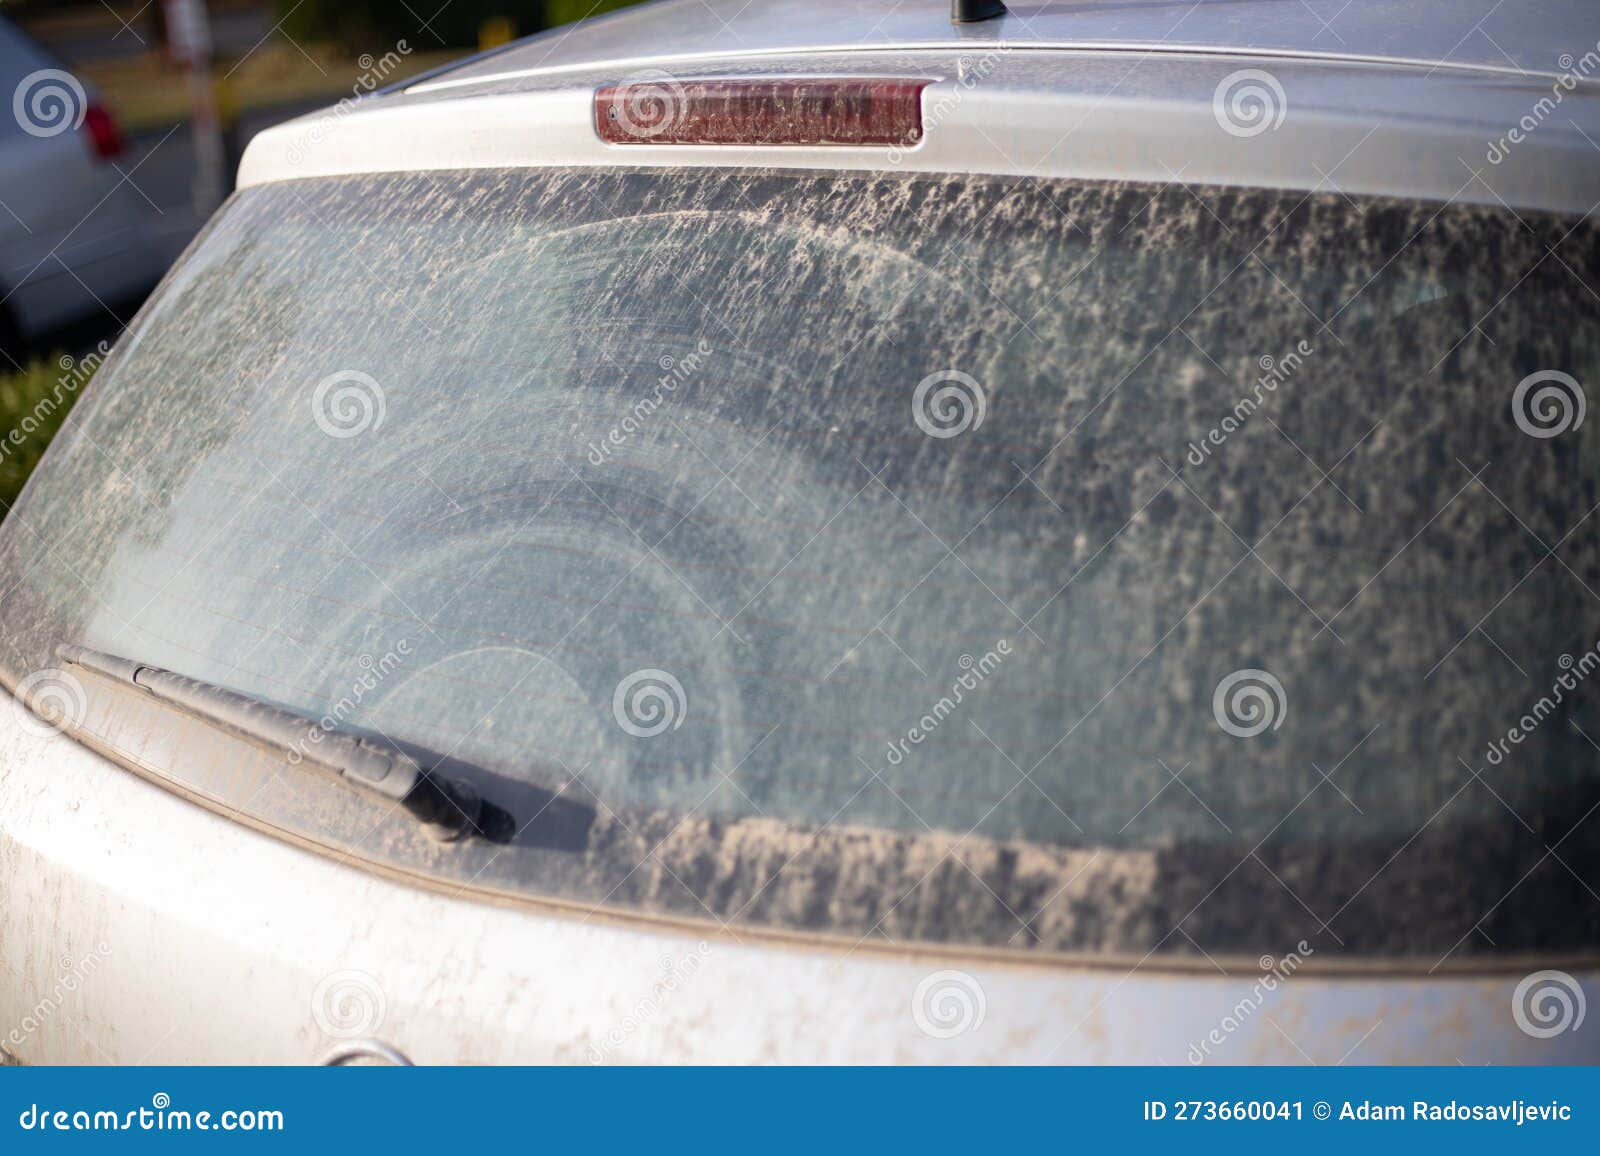 dirty back glass on car from unclean rain with sand